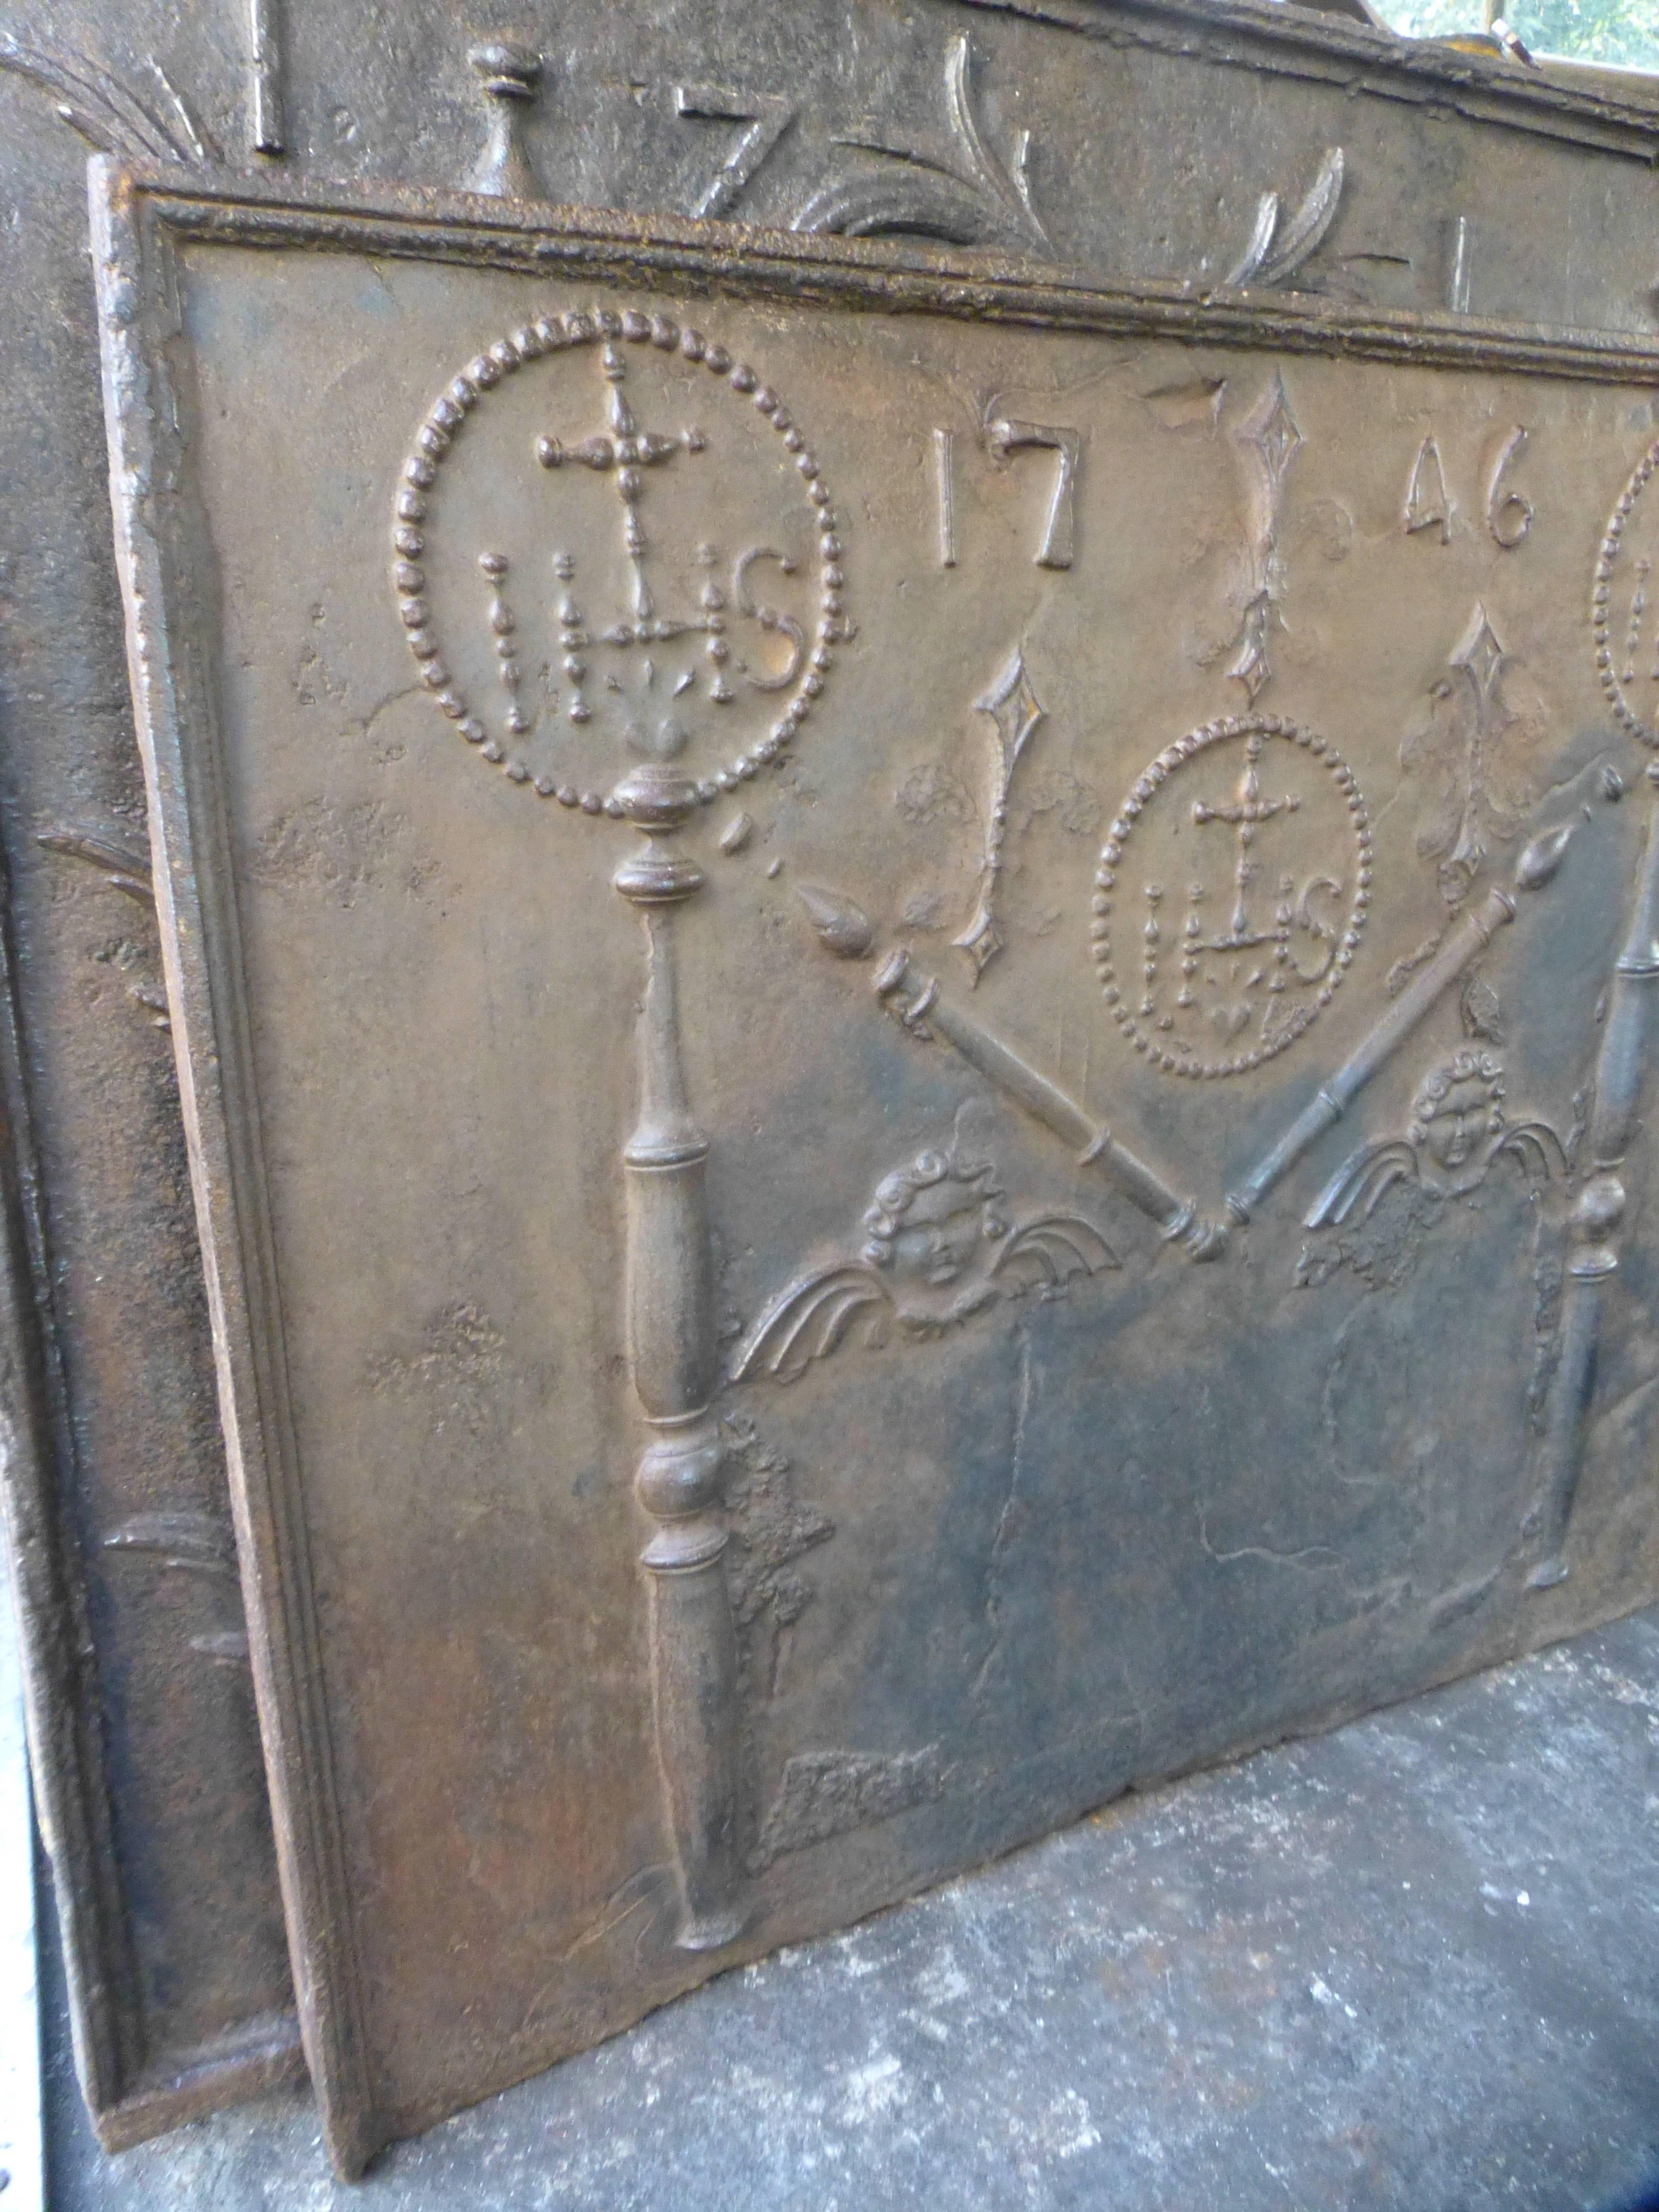 French Fireback with pillars, angels, fleurs de lis and the date of production 1746.

The monogram IHS stands for Iesus Hominum Salvator (Jezus the Savior of Humanity) or In Hoc Signo (In this sign will you win). The fleurs de lis were partly